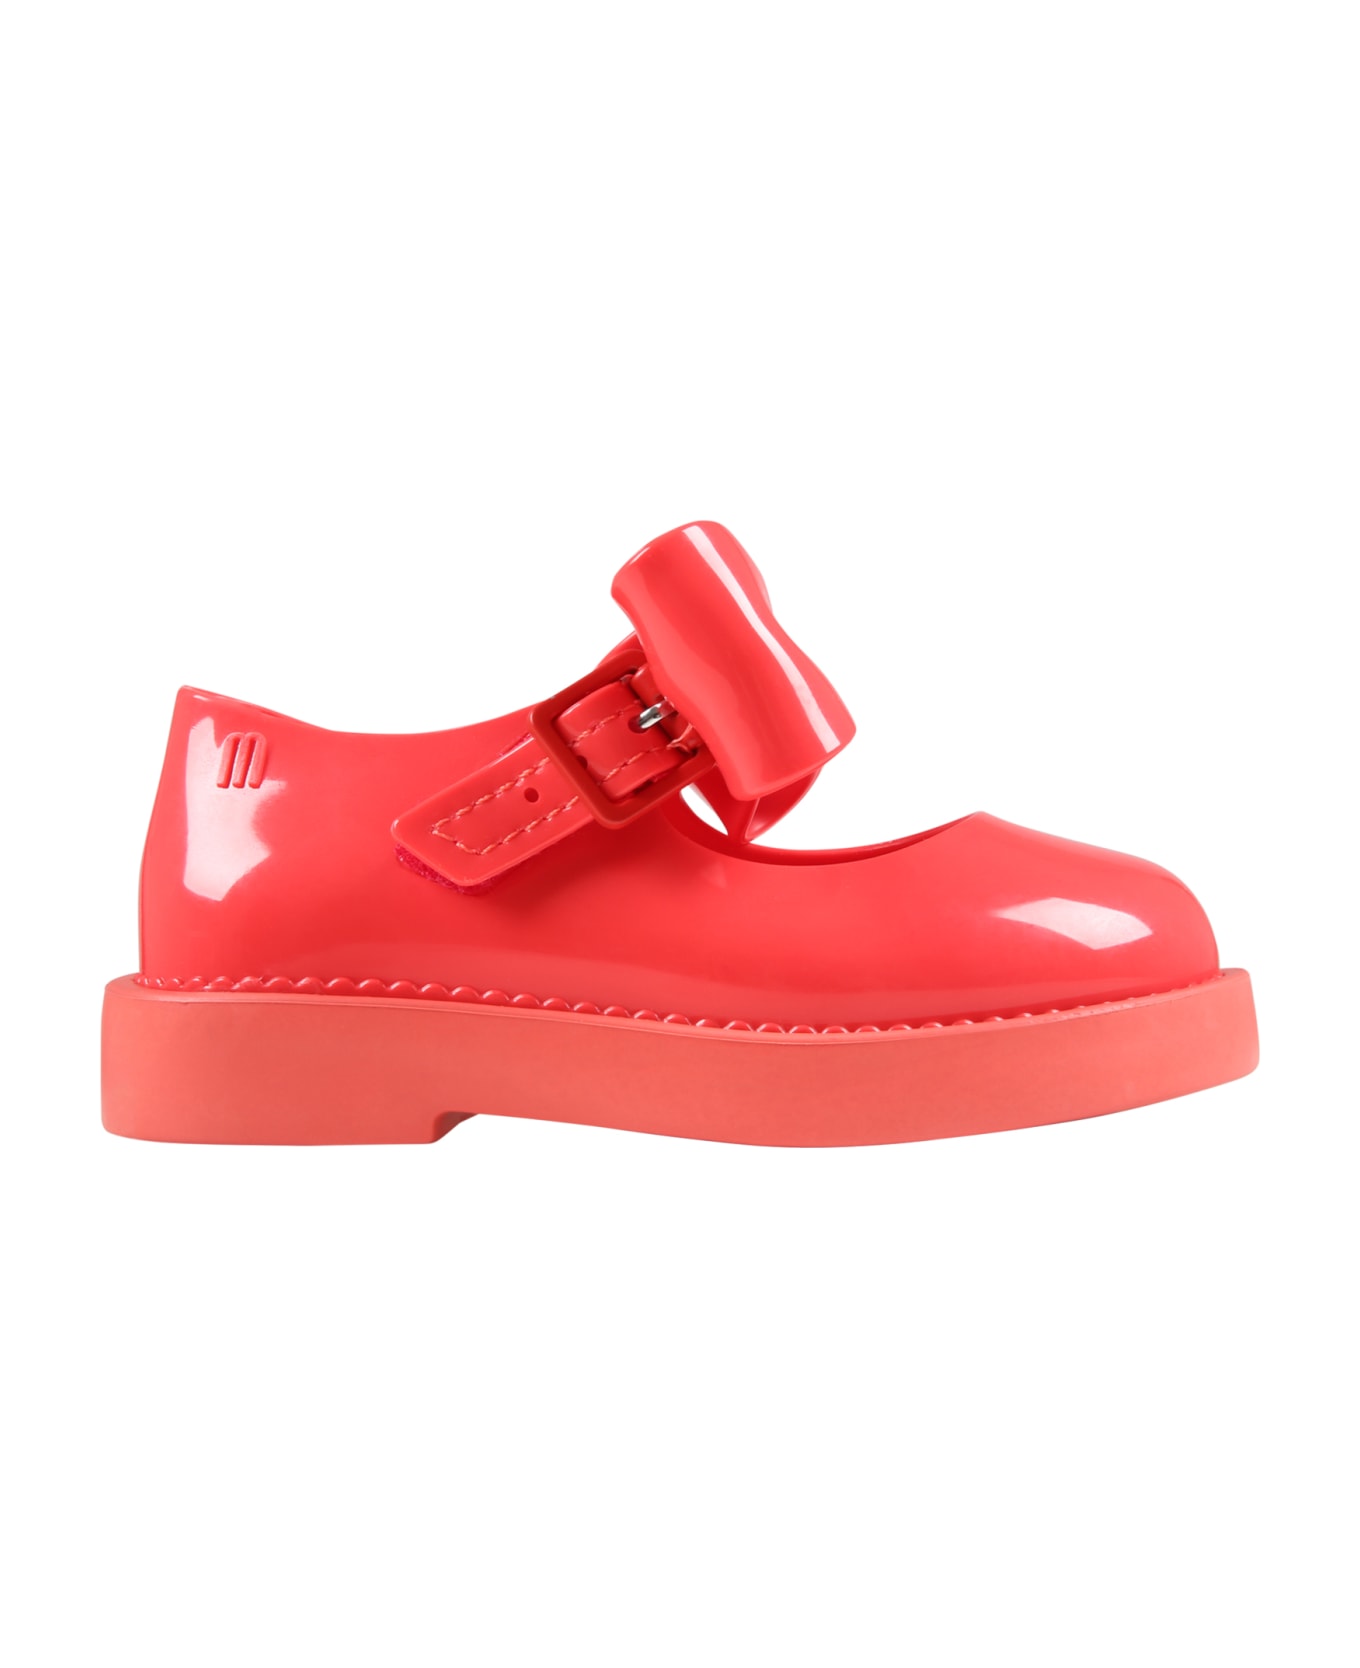 Melissa Red Ballerina Flats For Girl With Bow - Red シューズ